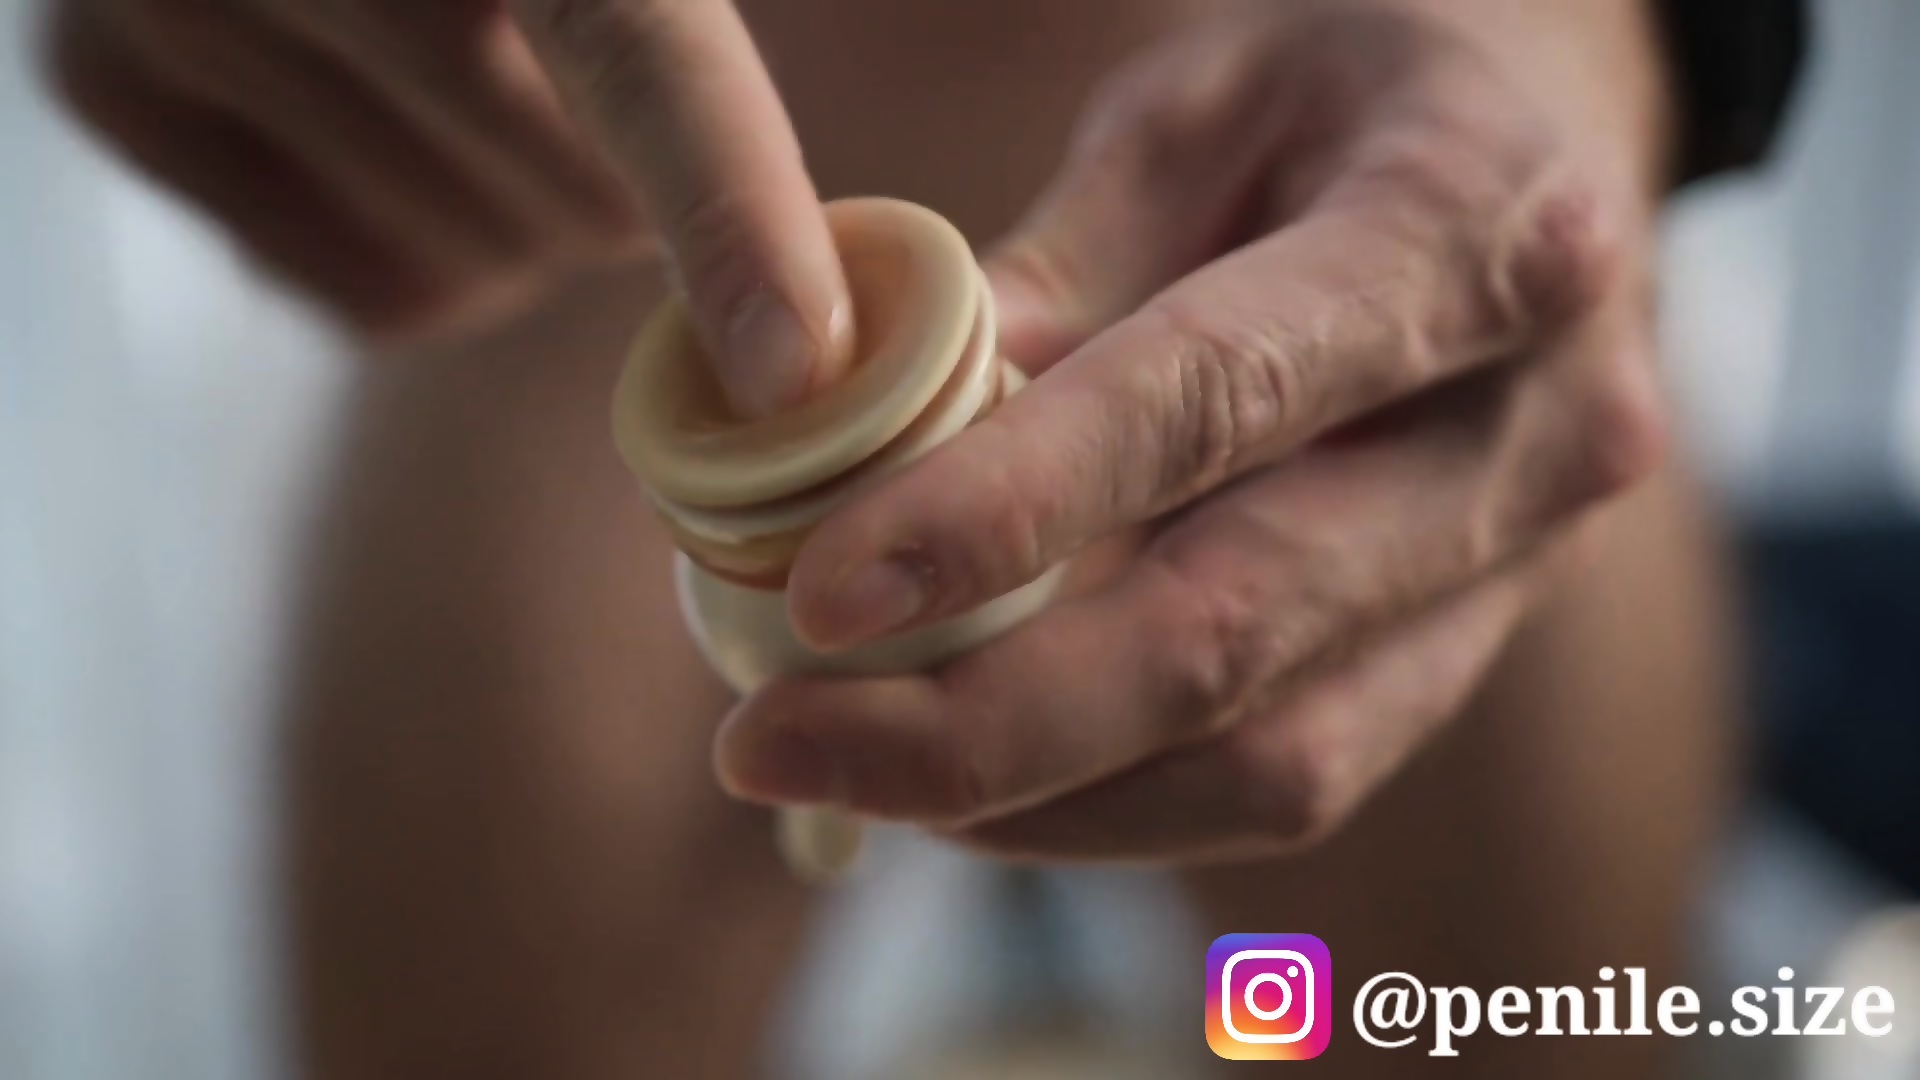 How To Use A Naked Man Penis Extender(instagrampenile.size) pic